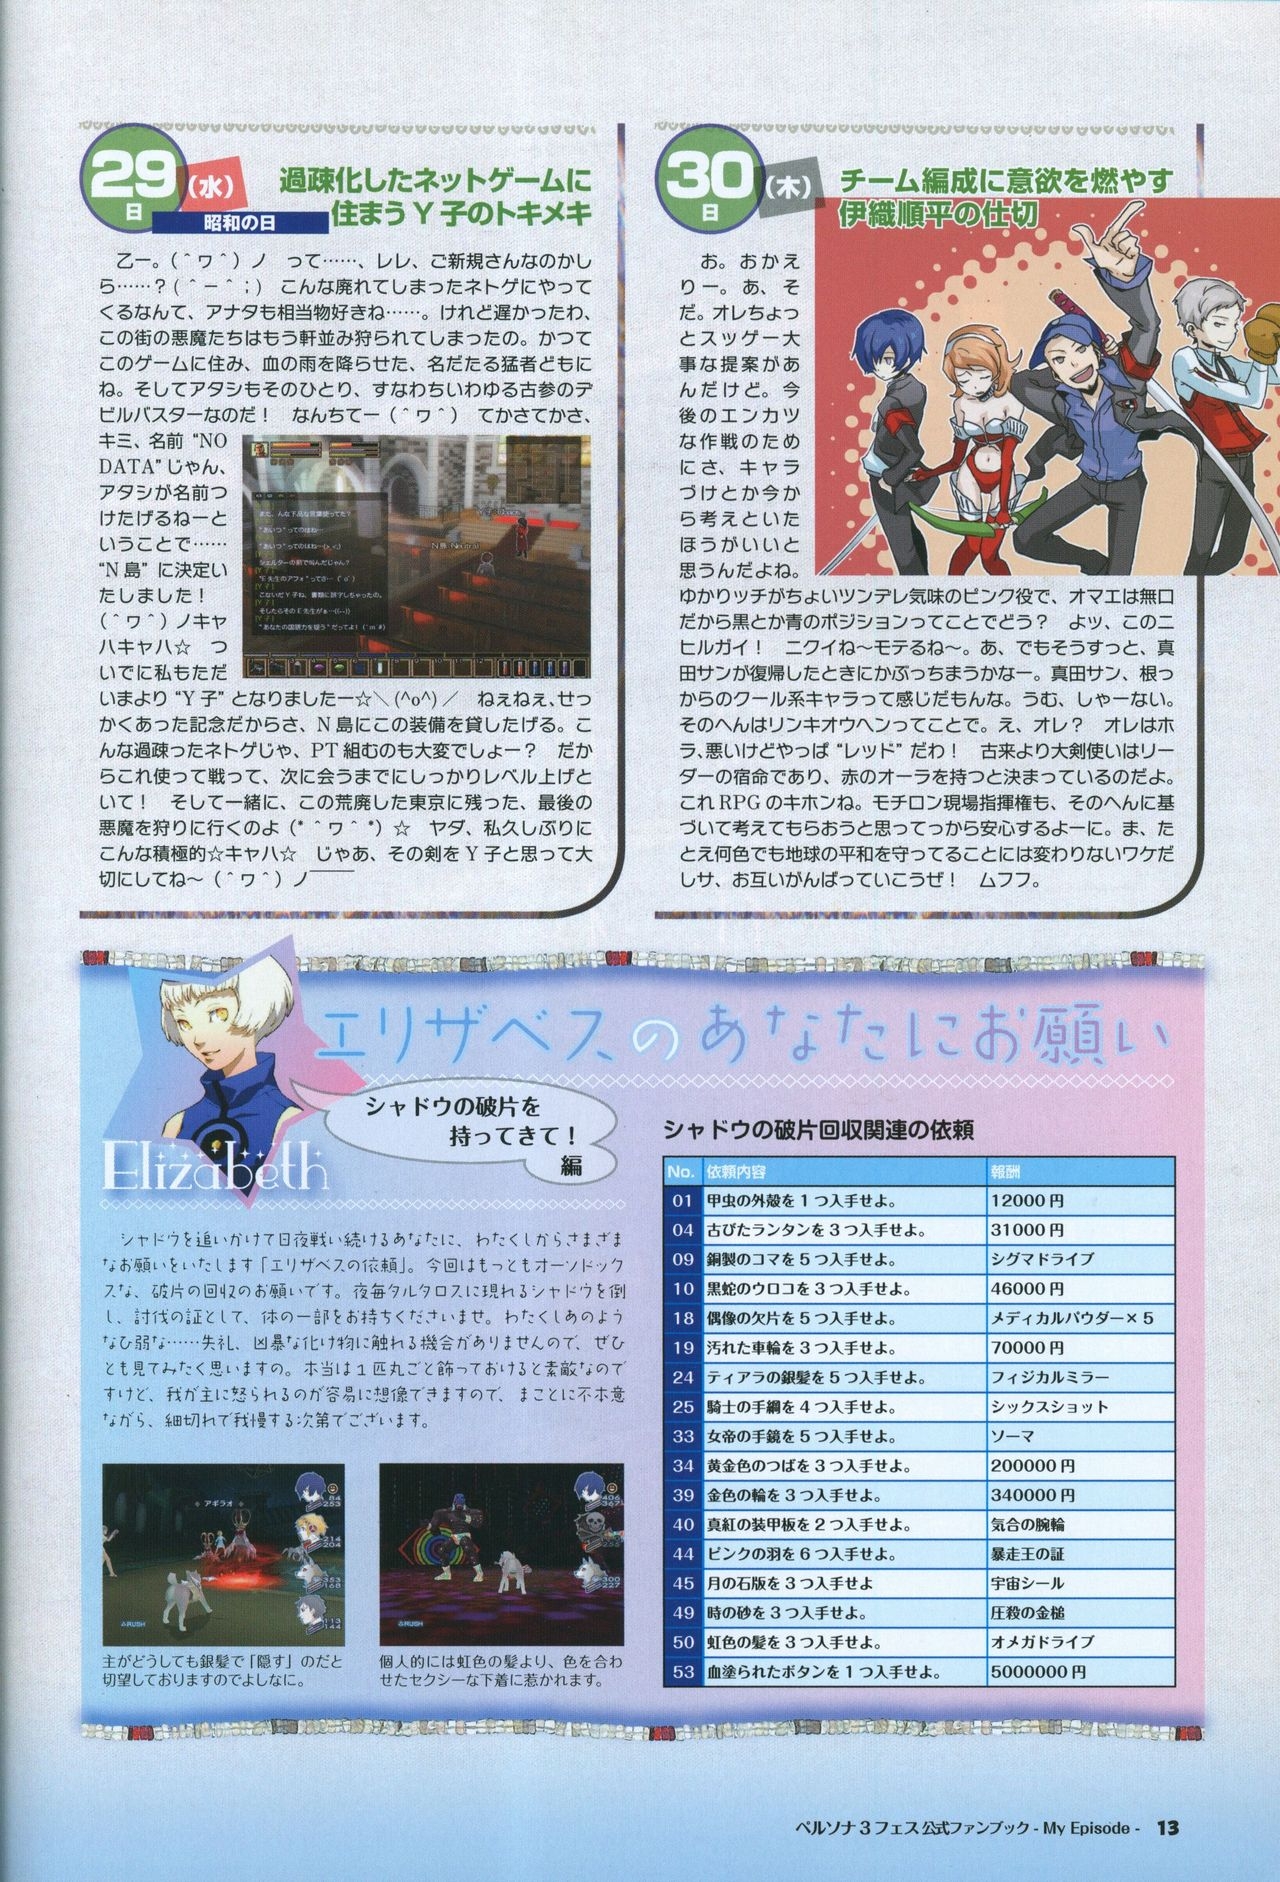 Persona 3 Fes Official Fan Book -My Episode- 14